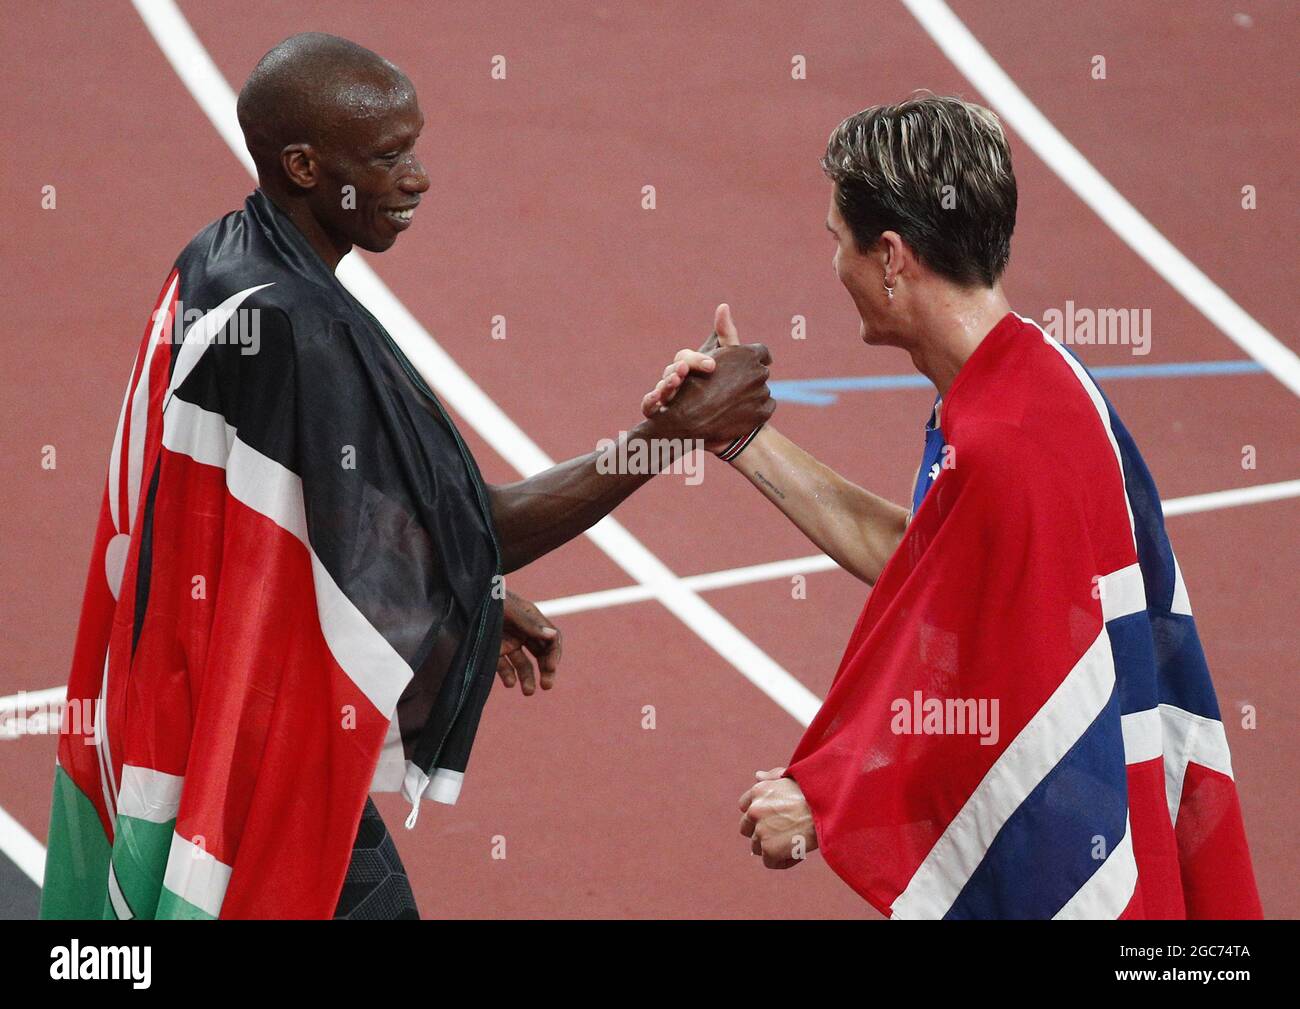 Tokyo, Japan. 07th Aug, 2021. Norway's Jakob Ingebrigtsen (R) wins the Men's 1500m Final in 3:28.32 and congratulates Kenya's Timothy Cheruiyot on finishing second, 3:29.01 at the Olympic Stadium during the 2020 Summer Olympics in Tokyo, Japan on Saturday, August 7, 2021. Photo by Bob Strong/UPI Credit: UPI/Alamy Live News Stock Photo